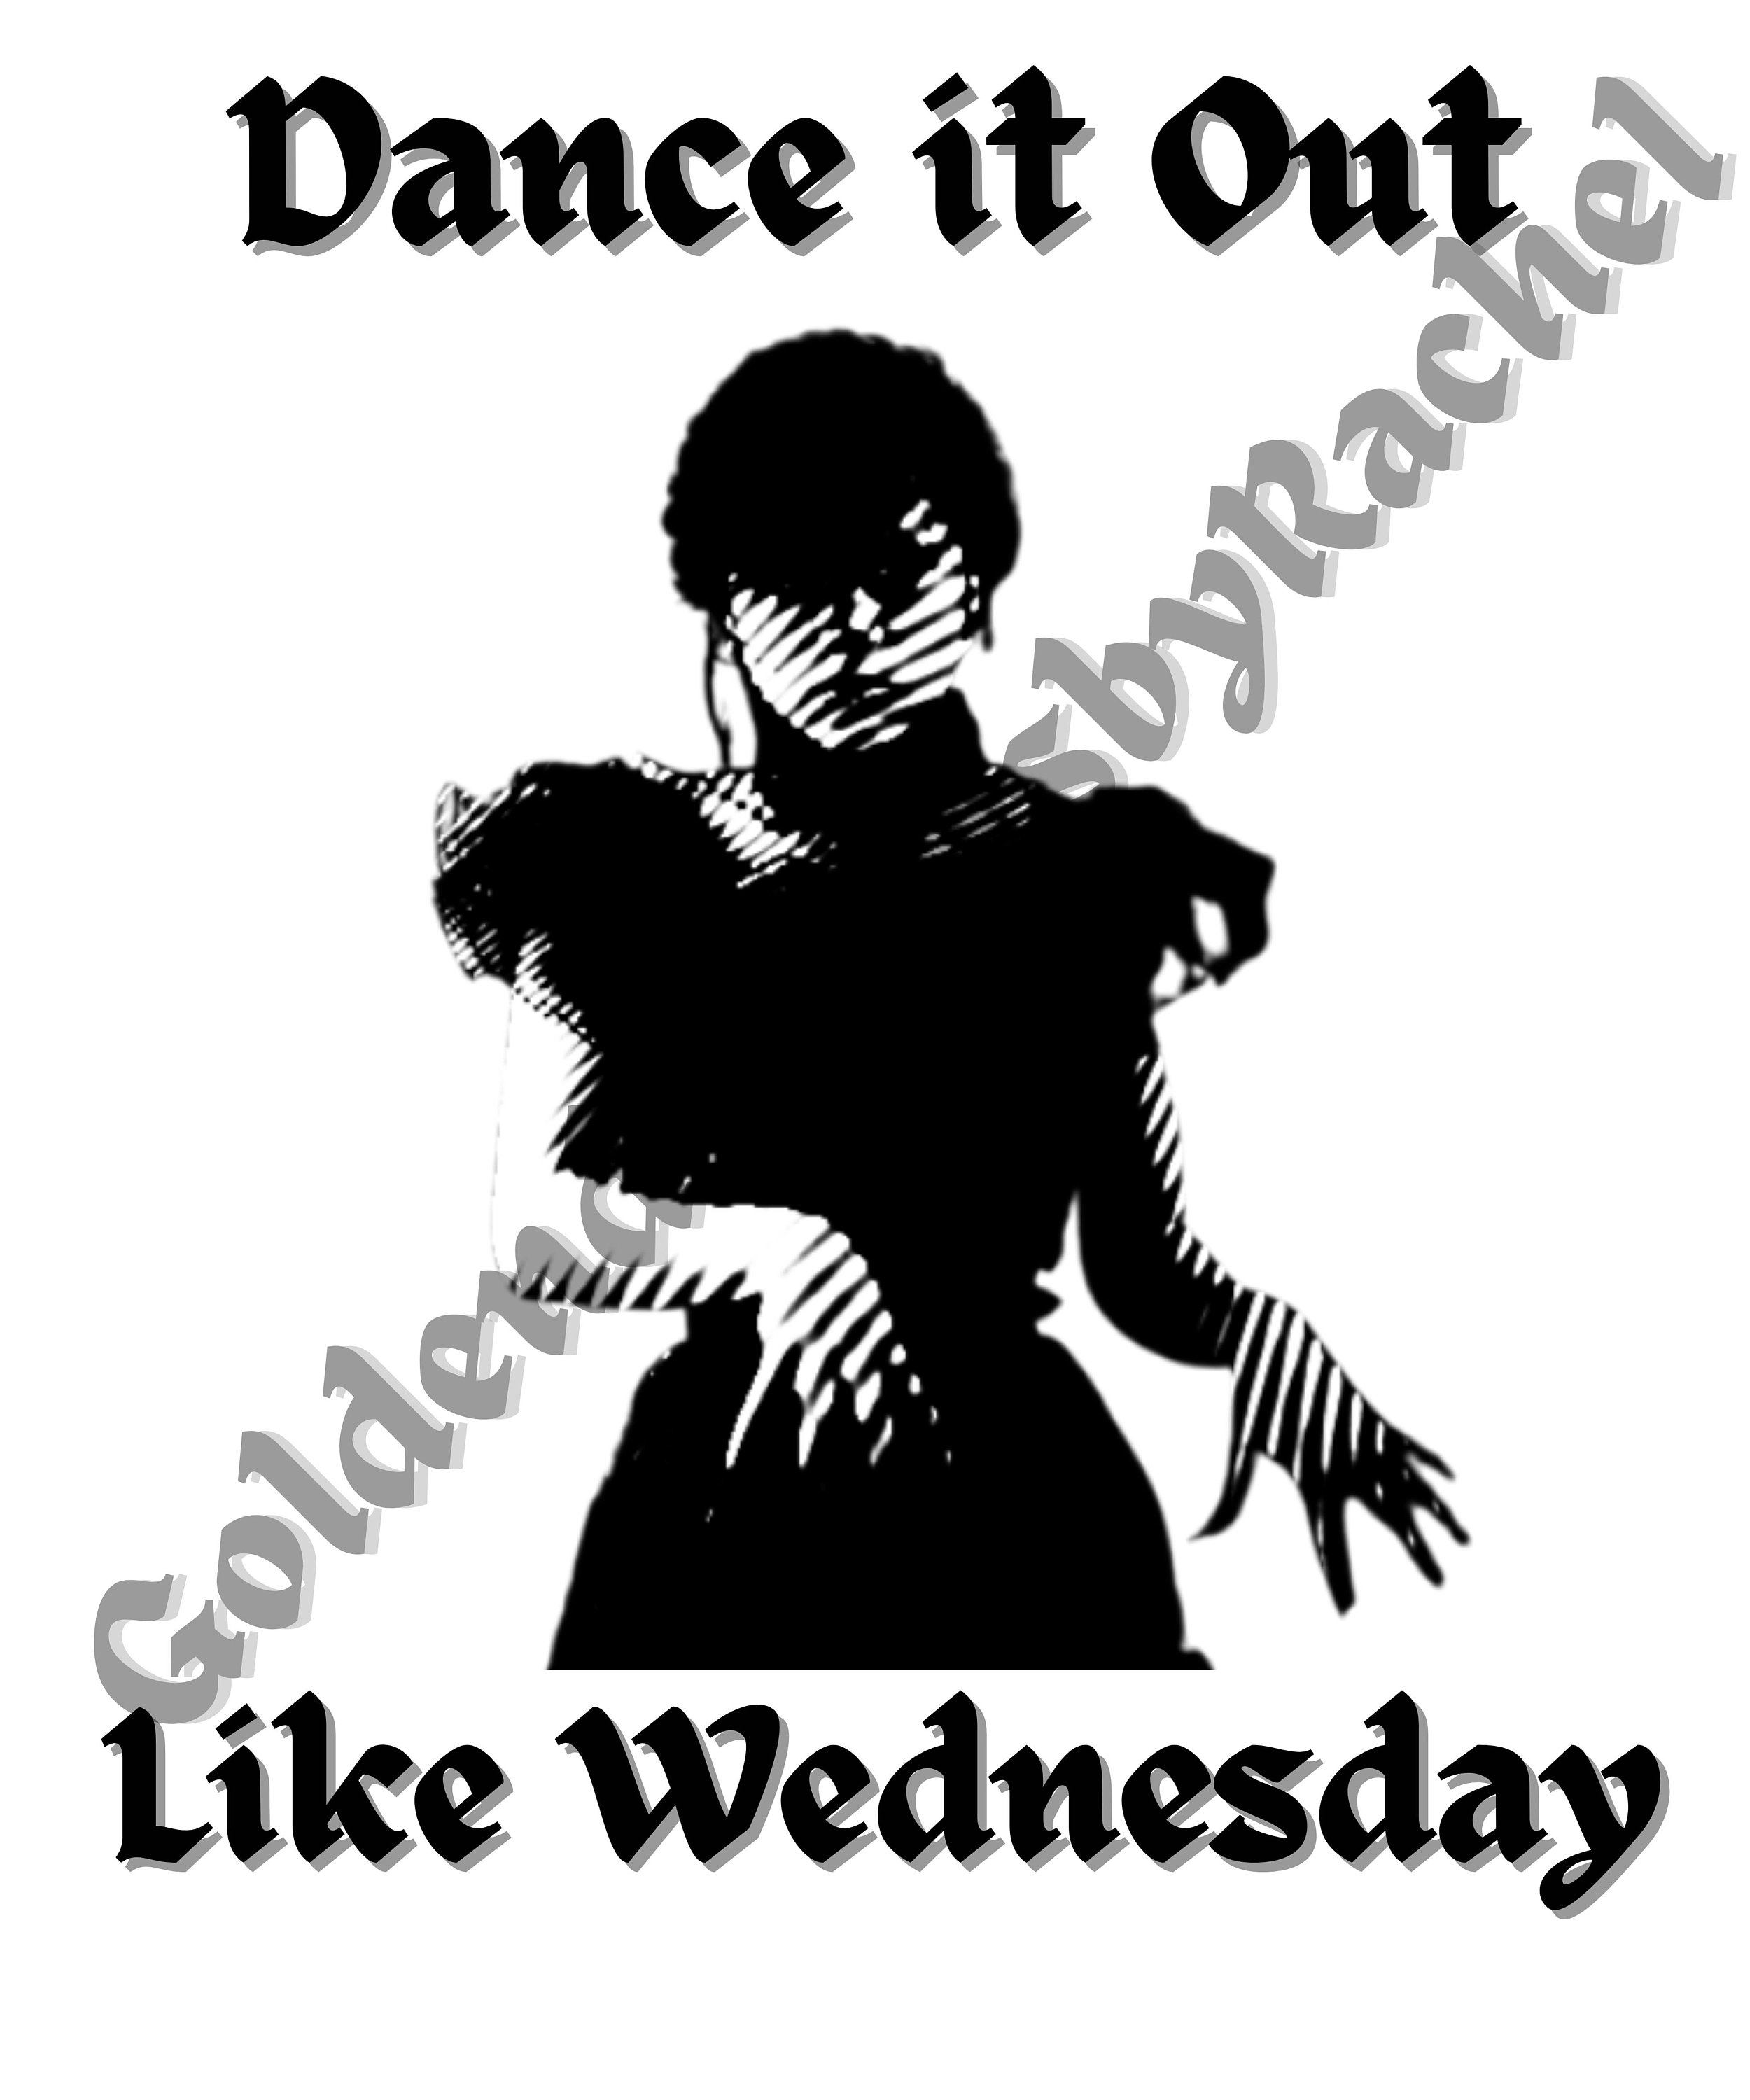 Wednesday Addams Dance Scene: Video, Quotes